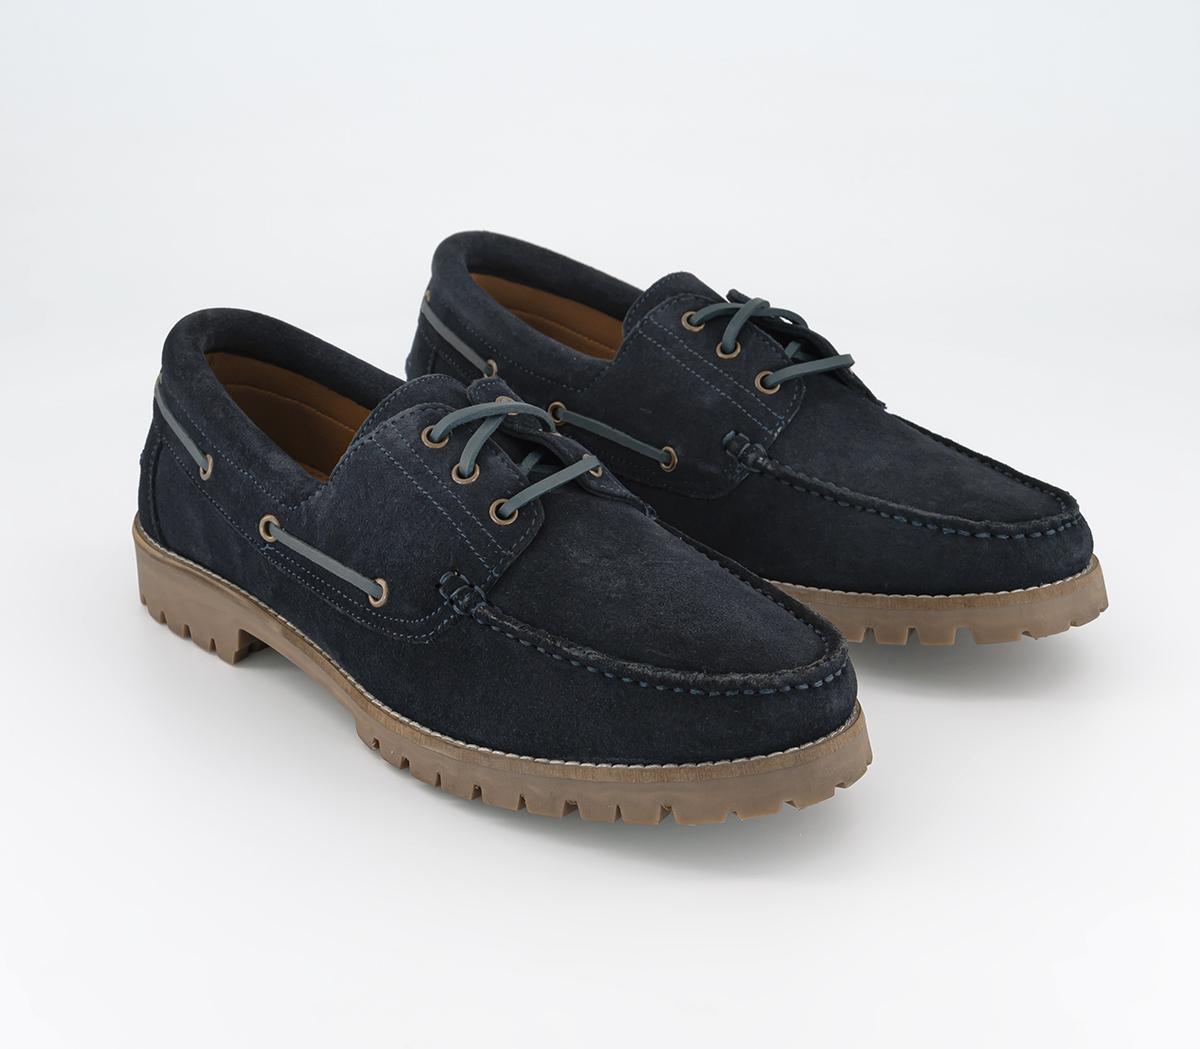 OFFICE Mens Colorado Cleated Suede Boat Shoes Navy Suede, 7